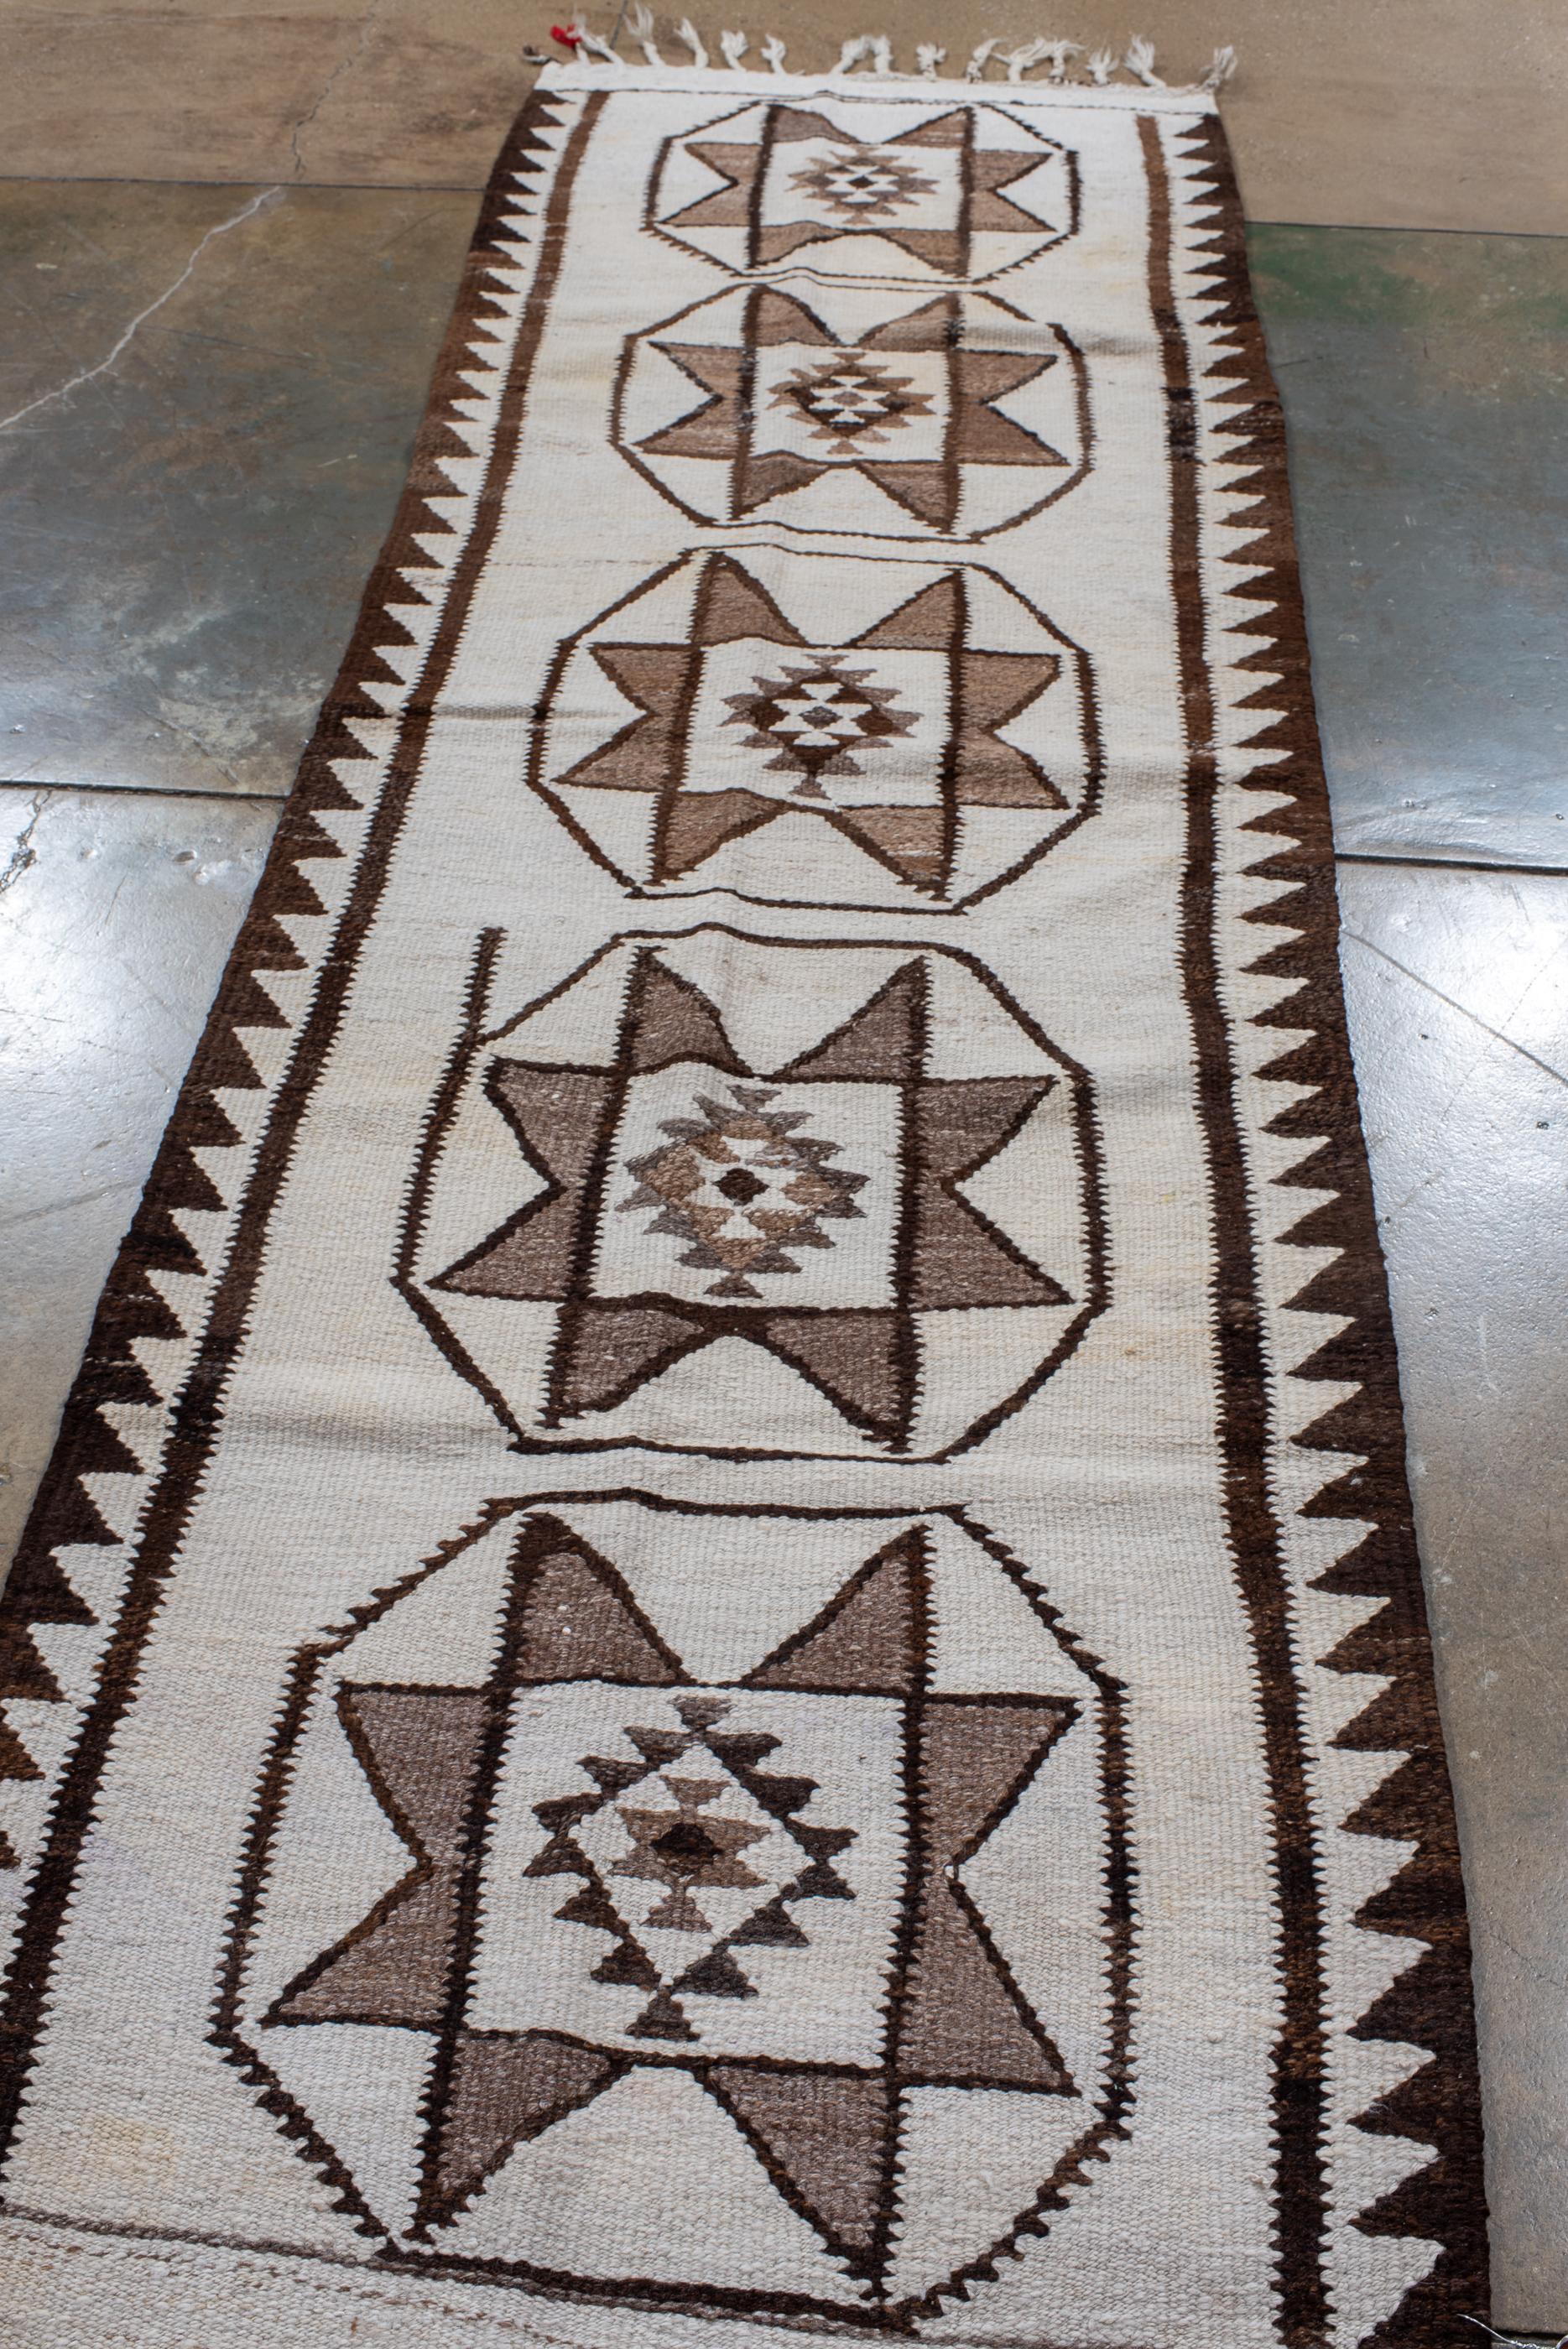 Turkish Antique Kilim Runner with Cream Field and Tassels on Ends